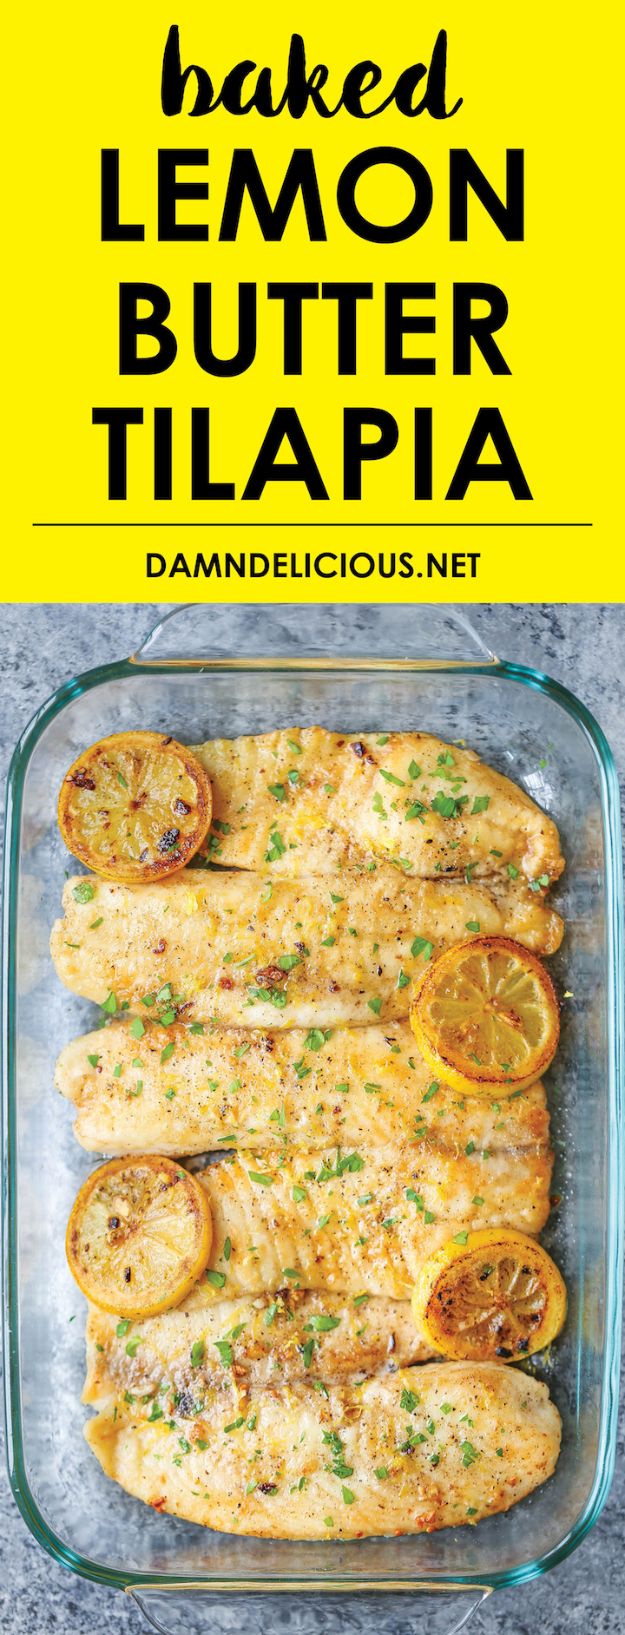 Best Brunch Recipes - Baked Lemon Butter Tilapia - Eggs, Pancakes, Waffles, Casseroles, Vegetable Dishes and Side, Potato Recipe Ideas for Brunches - Serve A Crowd and Family with the versions of Eggs Benedict, Mimosas, Muffins and Pastries, Desserts - Make Ahead , Slow Cooler and Healthy Casserole Recipes #brunch #breakfast #recipes